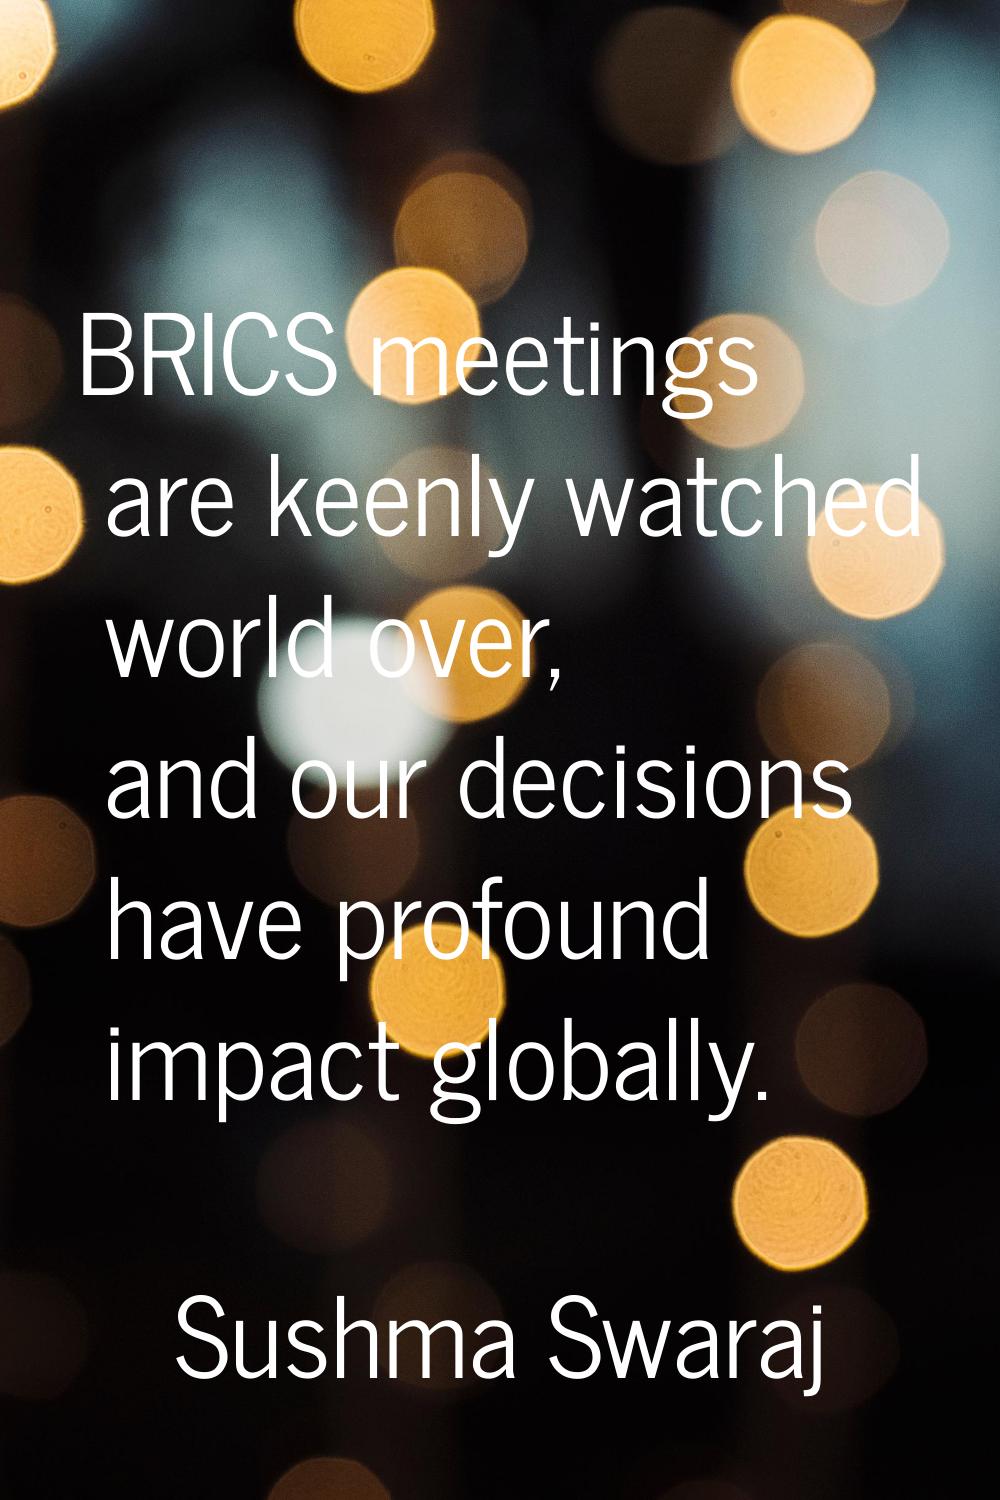 BRICS meetings are keenly watched world over, and our decisions have profound impact globally.